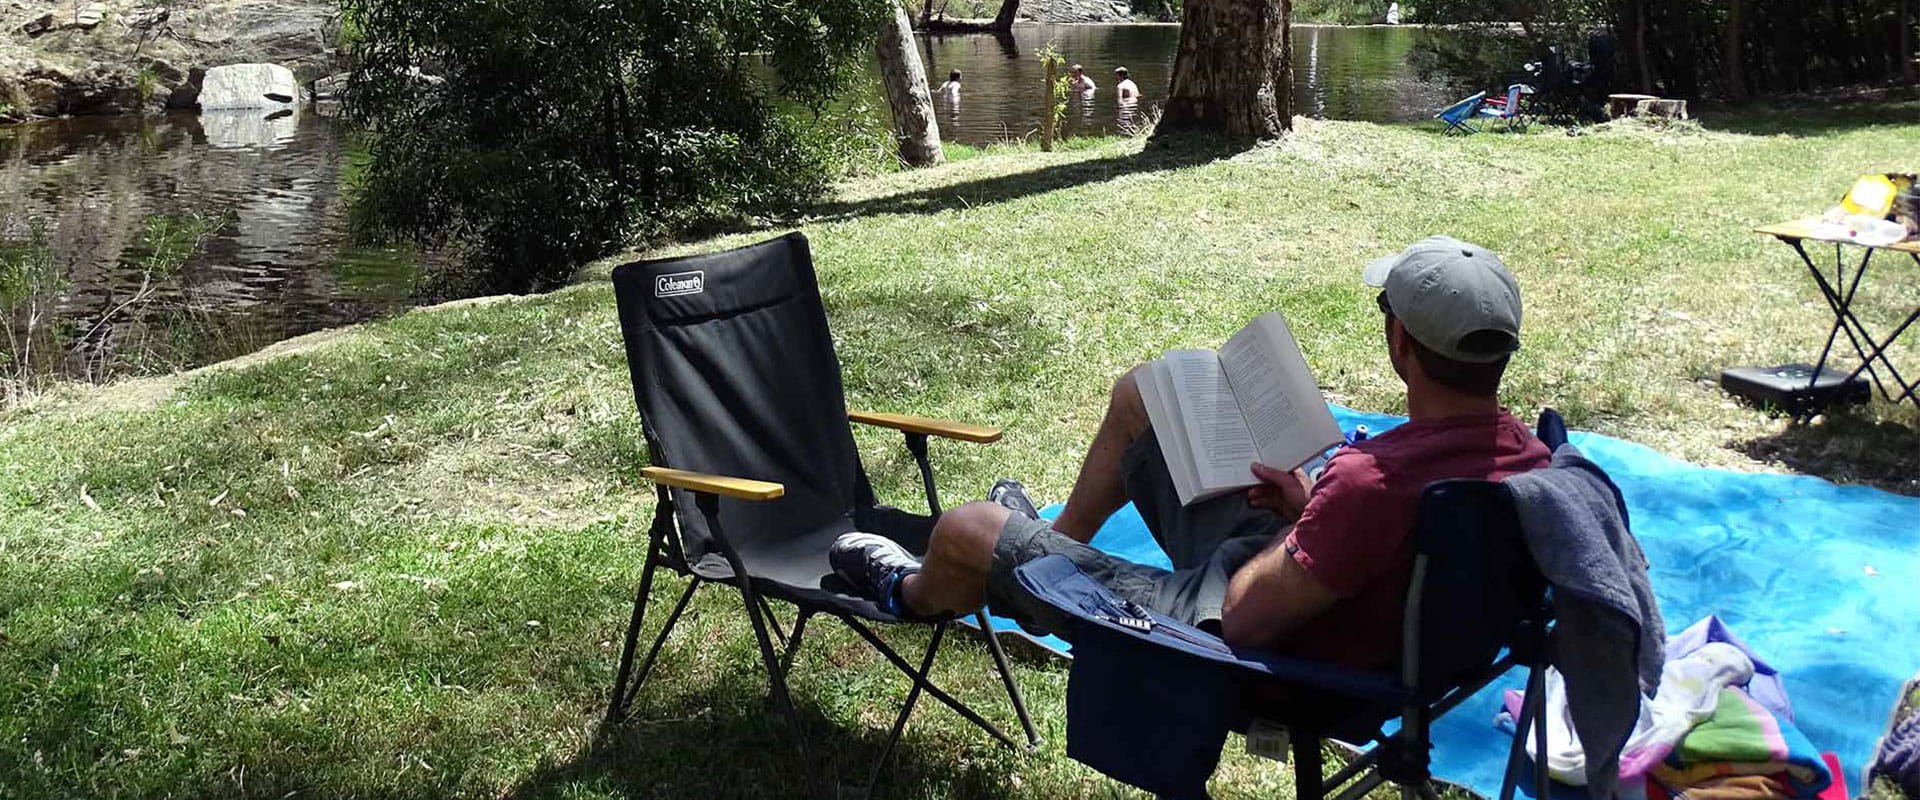 A man relaxes in a camping chair reading a book